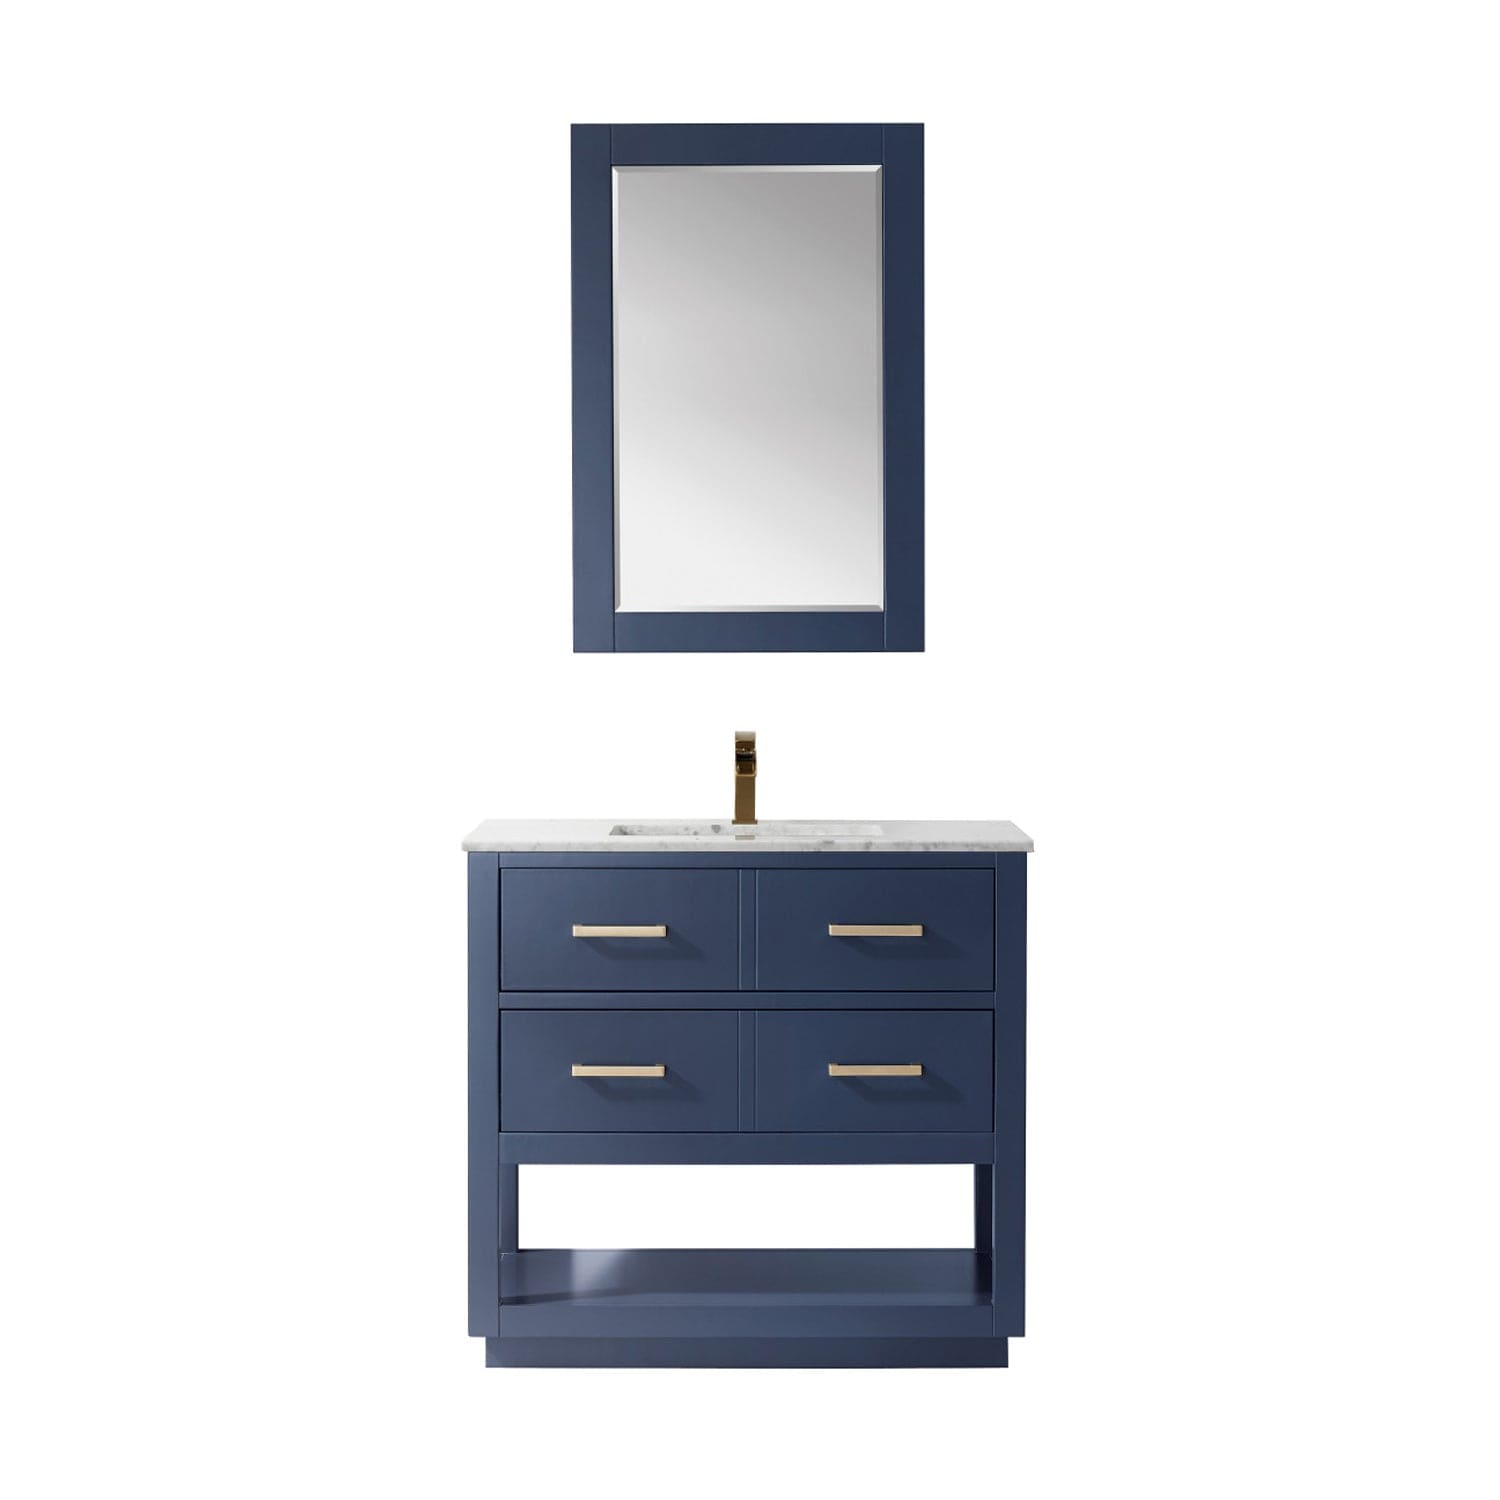 Altair Remi 36" Single Bathroom Vanity Set in Royal Blue and Carrara White Marble Countertop with Mirror 532036-RB-CA - Molaix631112971416Vanity532036-RB-CA